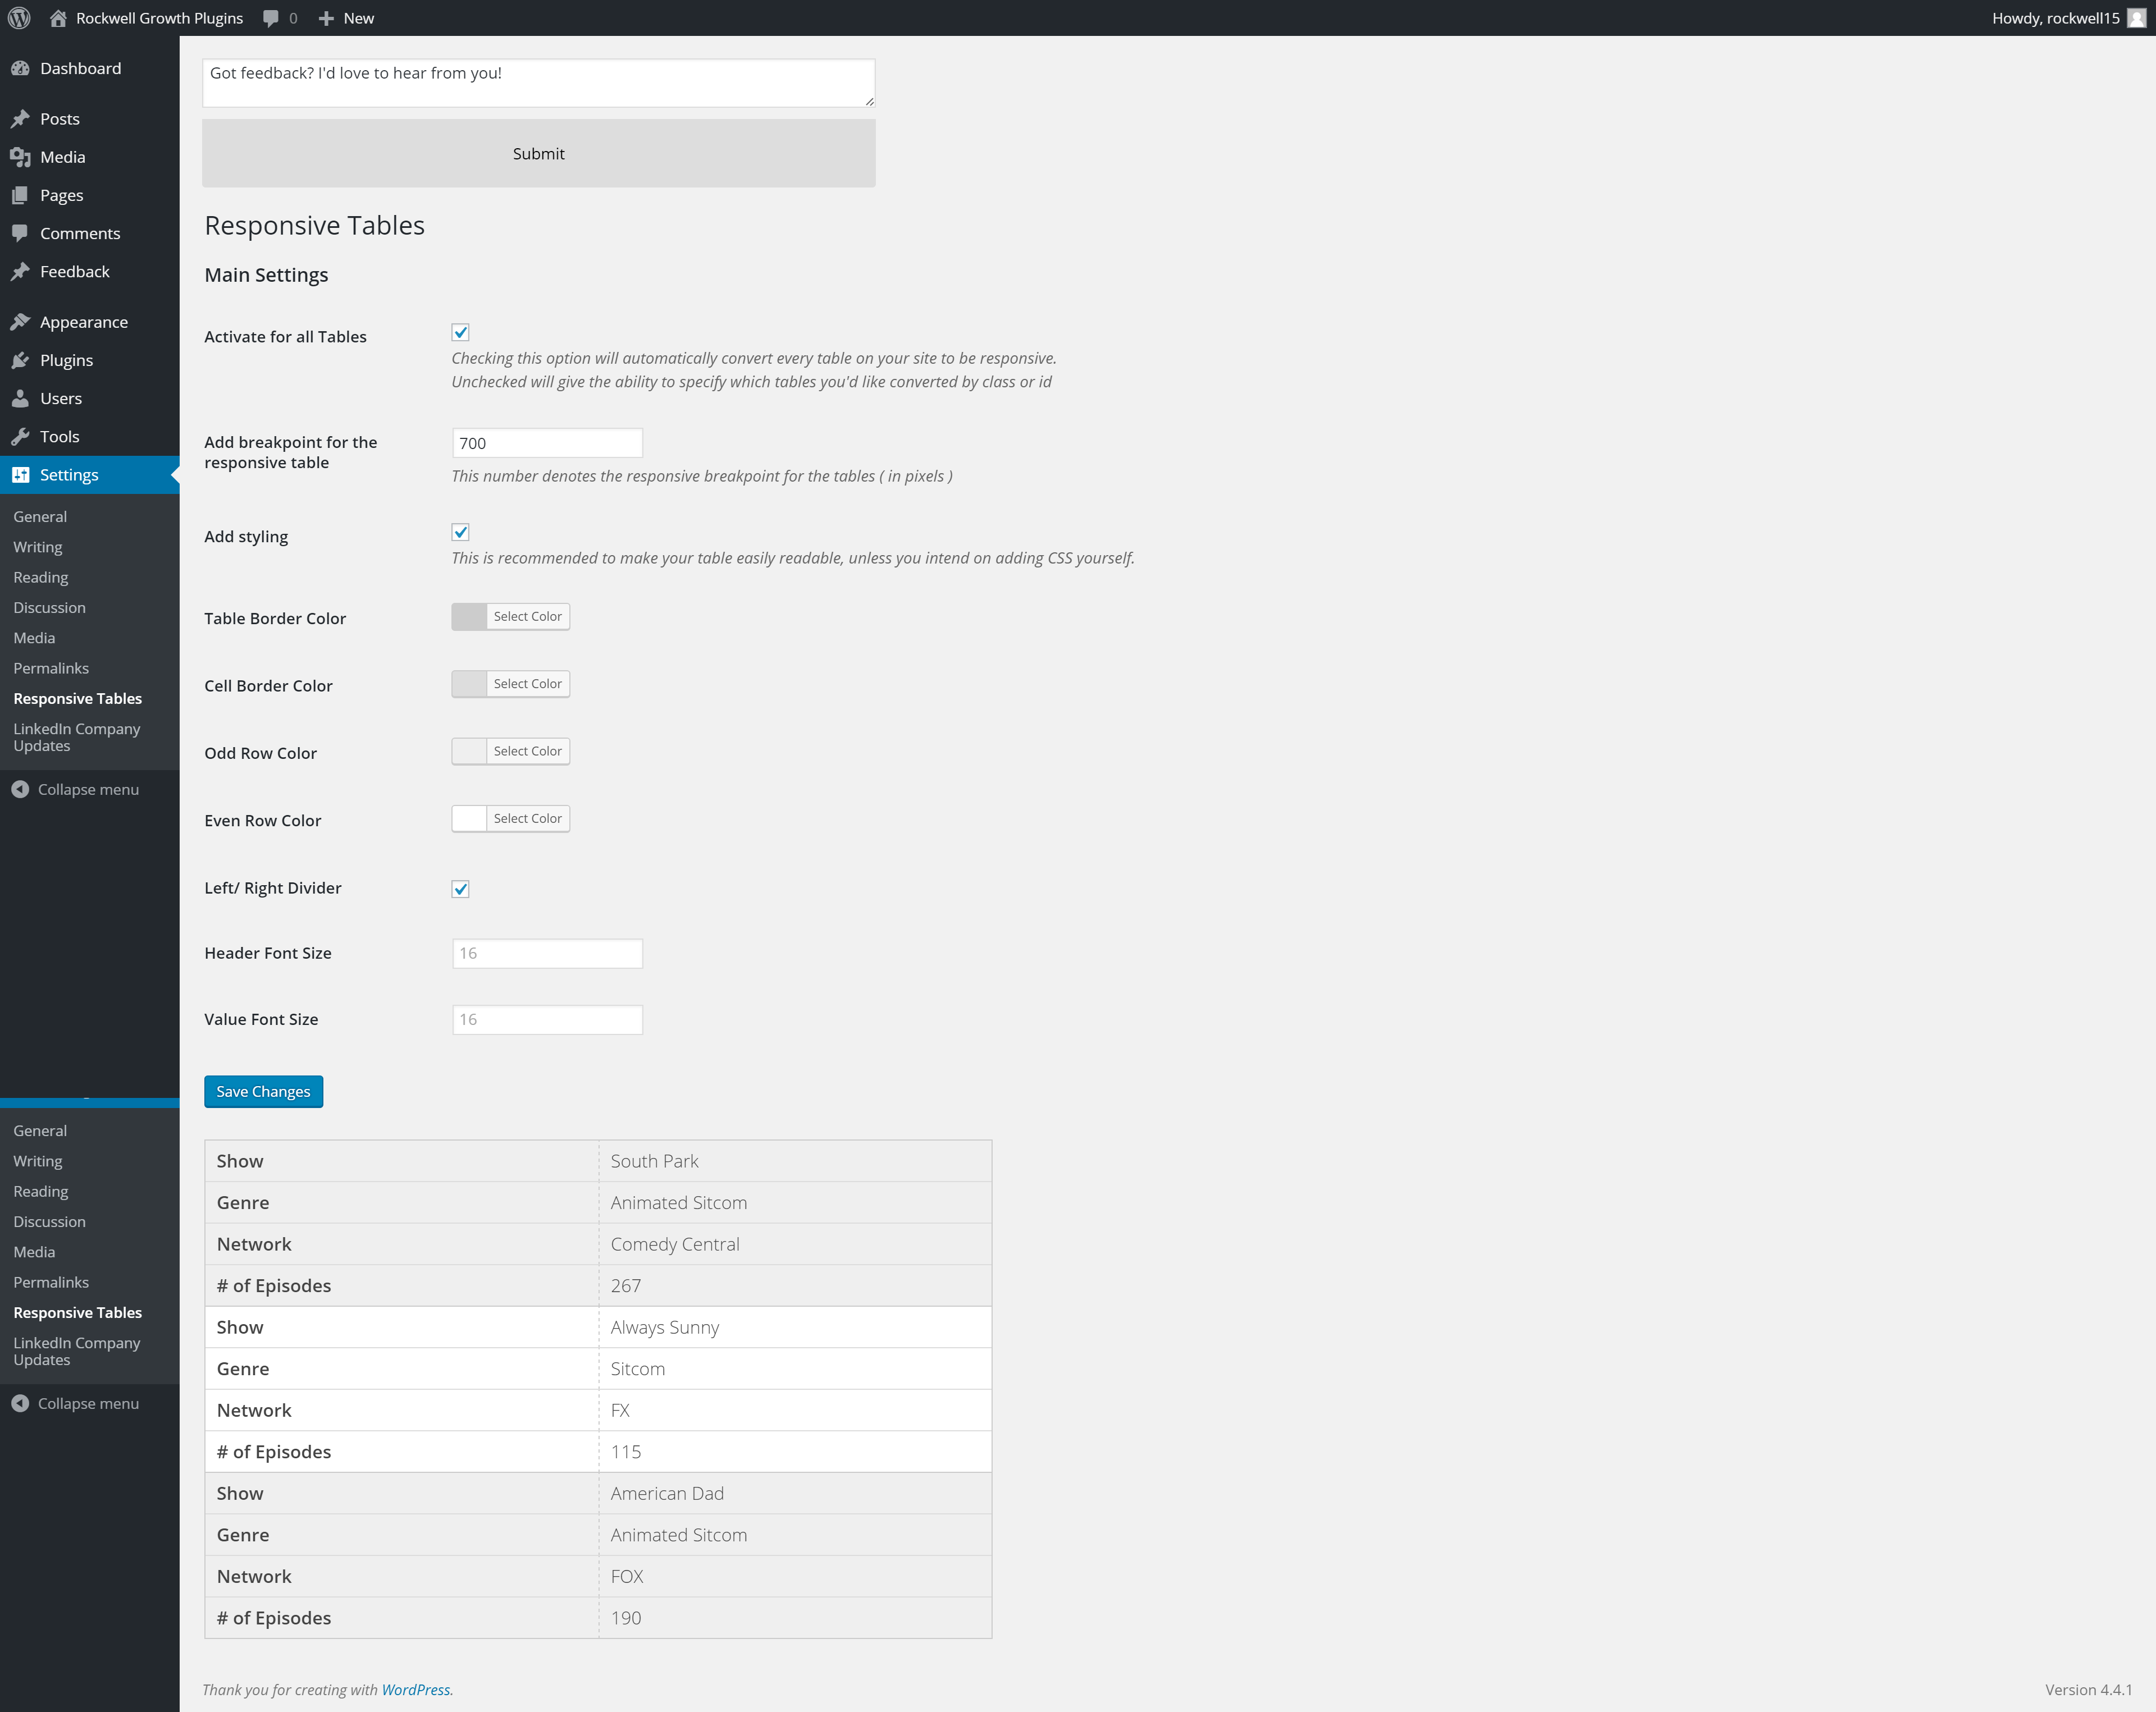 Screenshot of the admin area for the plugin